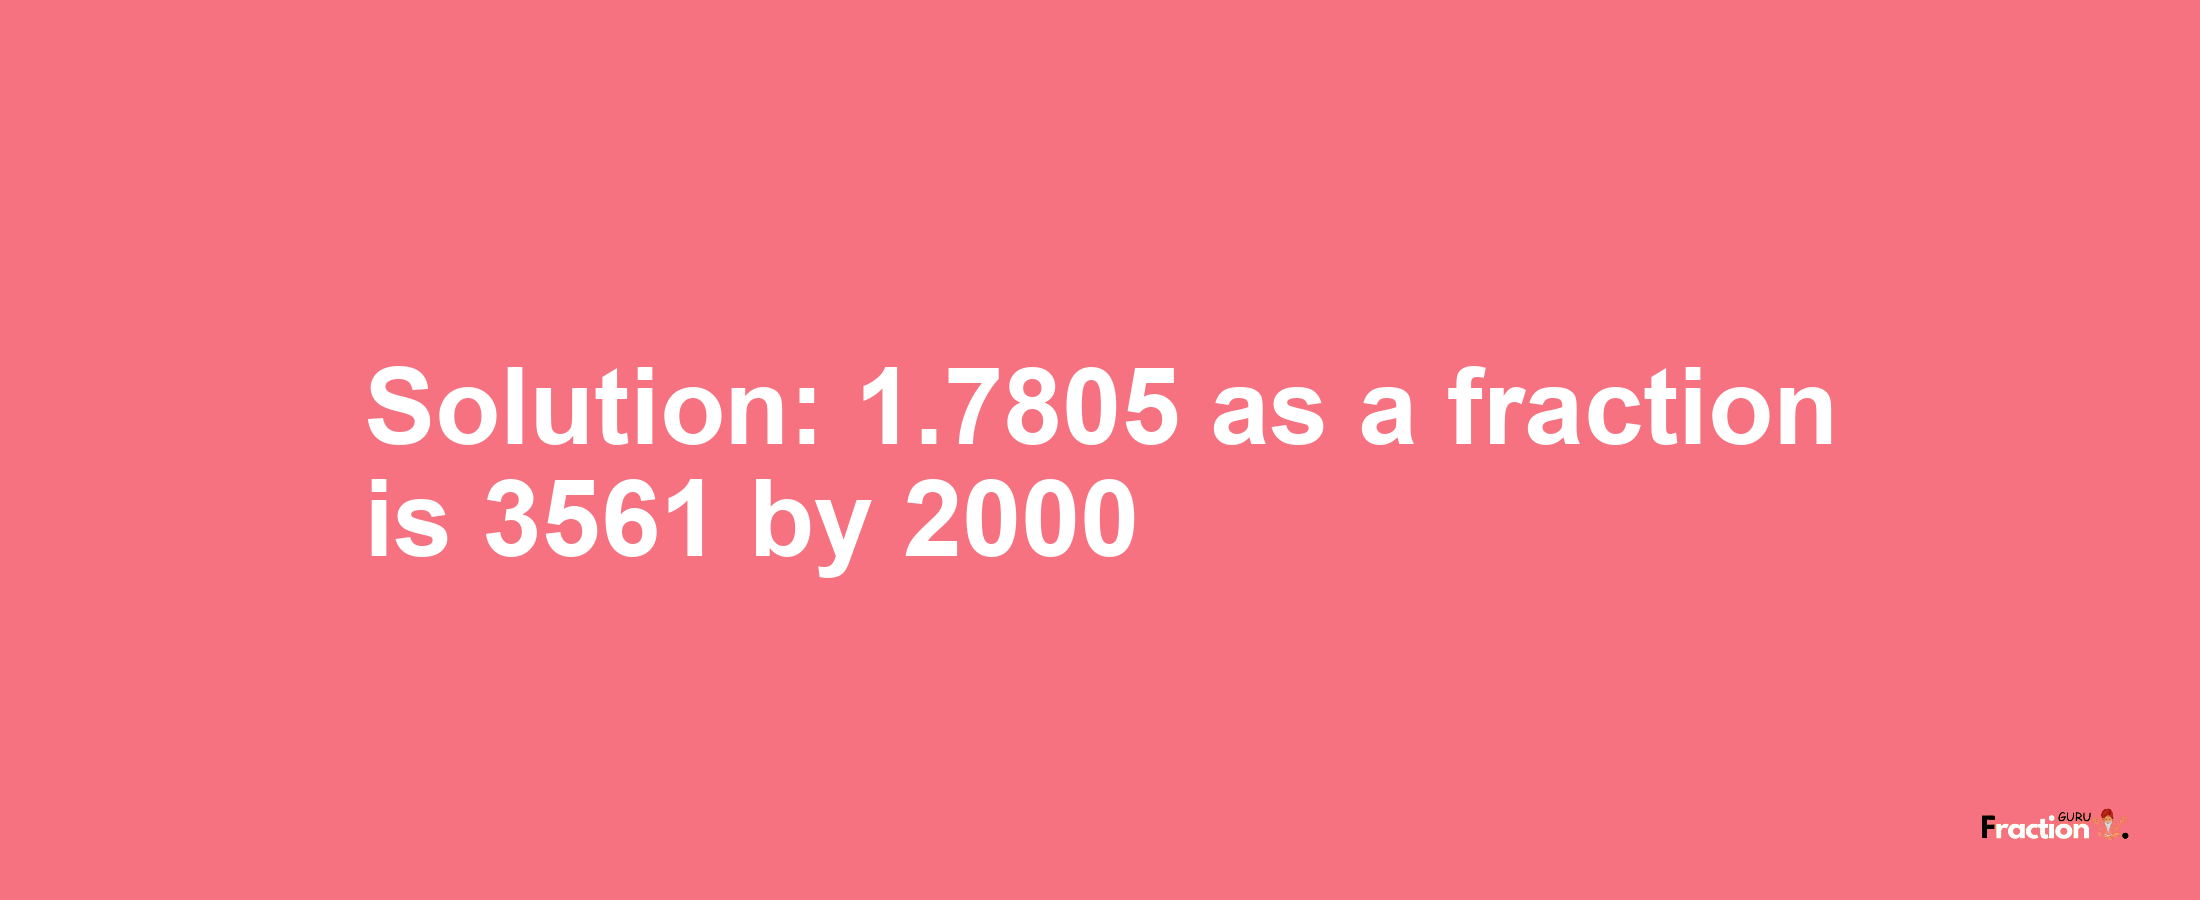 Solution:1.7805 as a fraction is 3561/2000